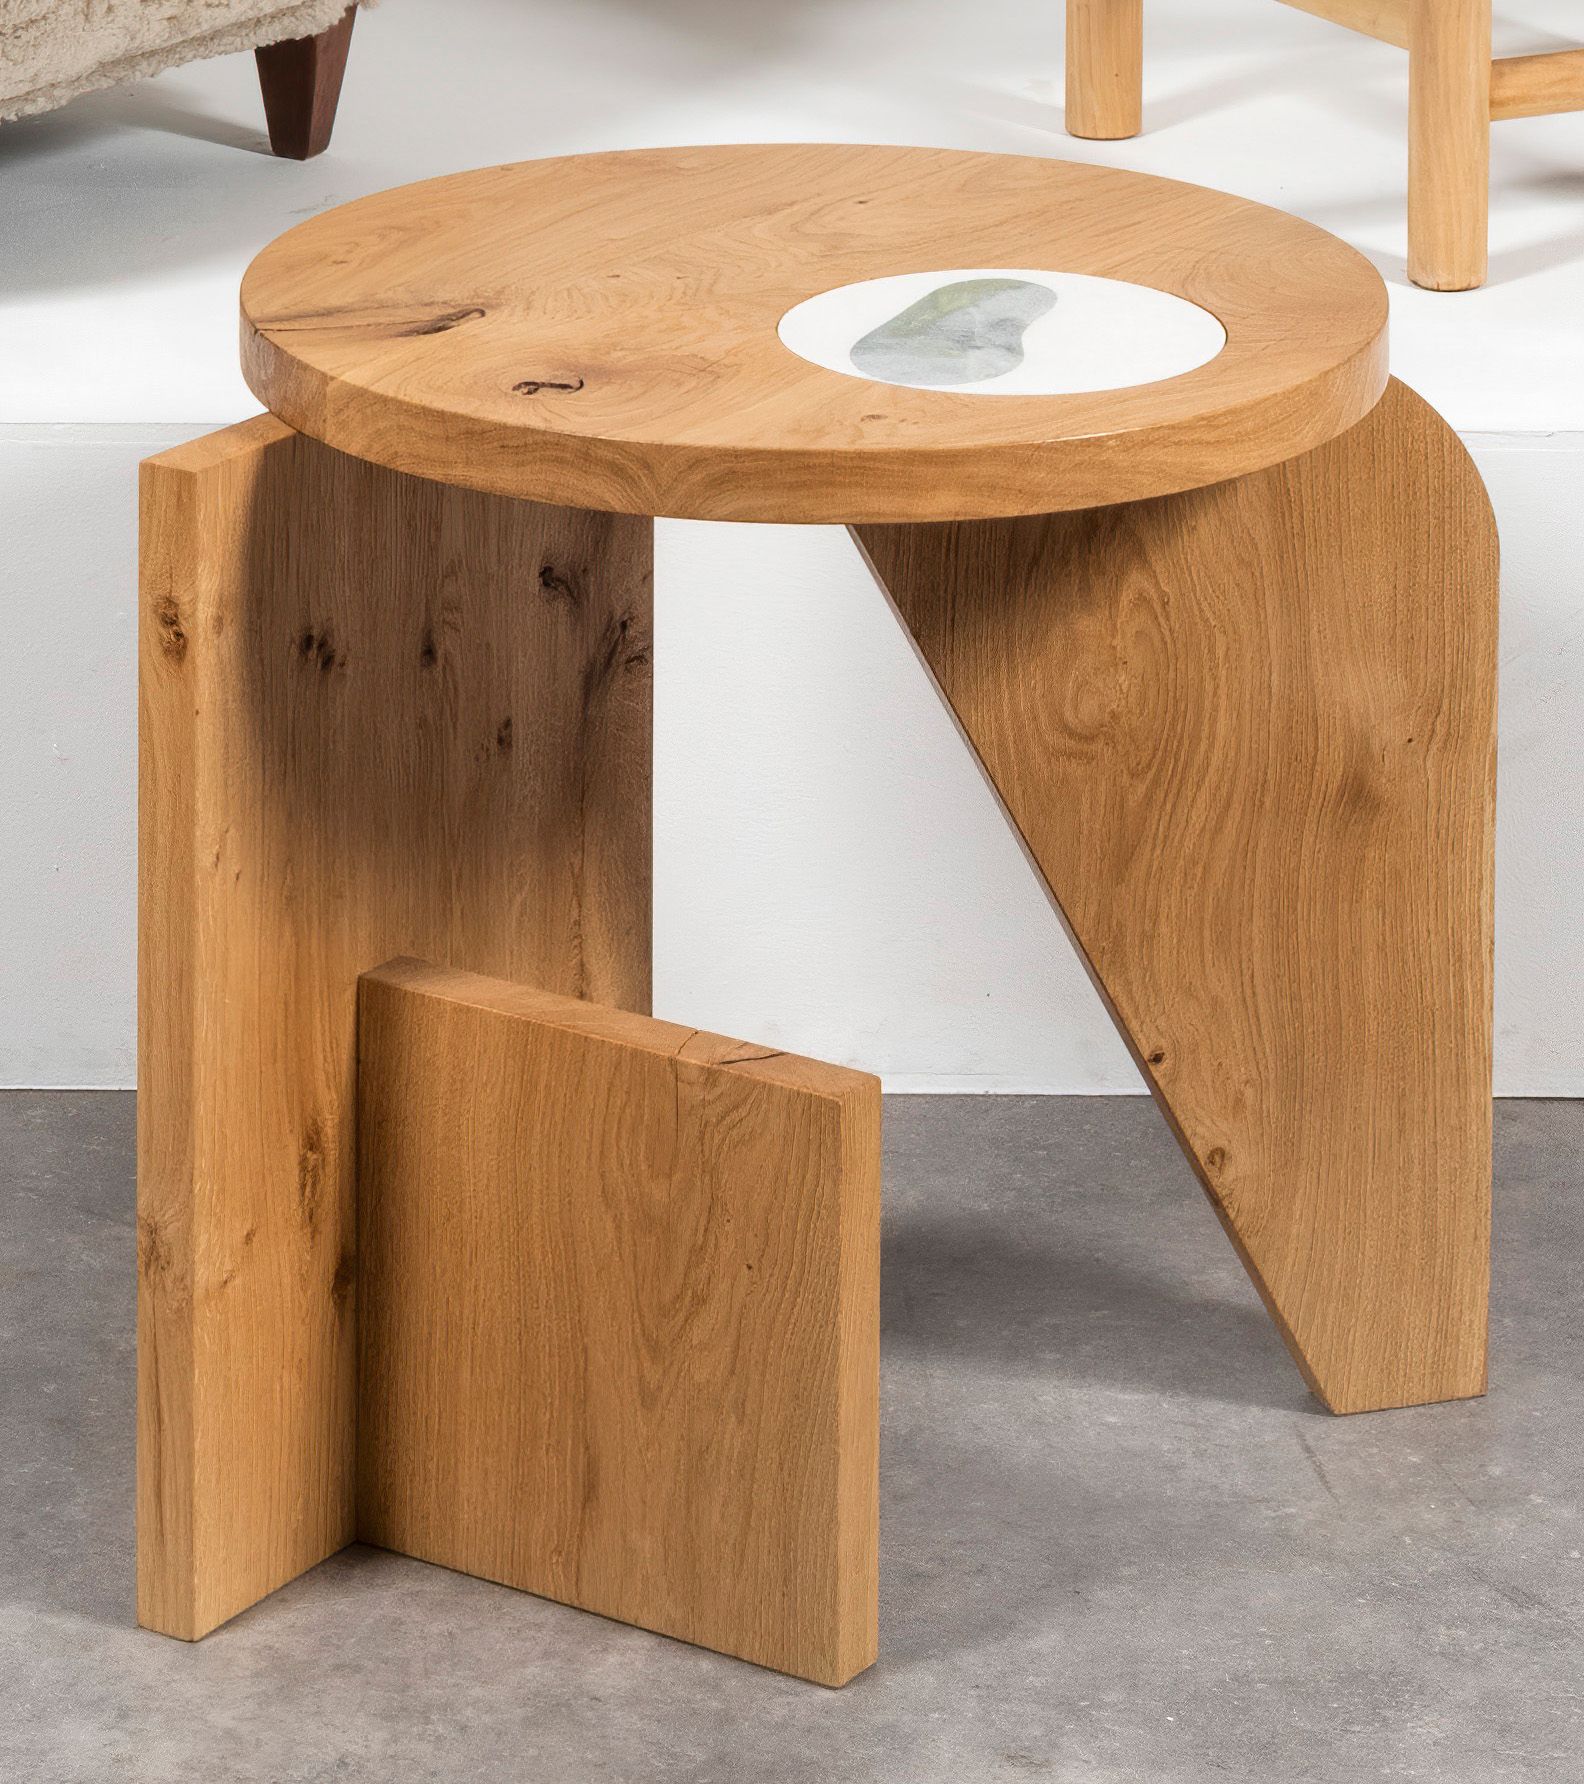 SEBASTIEN CAPORUSO AR Σ
Mod. Table
Pedestal table
Oak structure and marble on th&hellip;